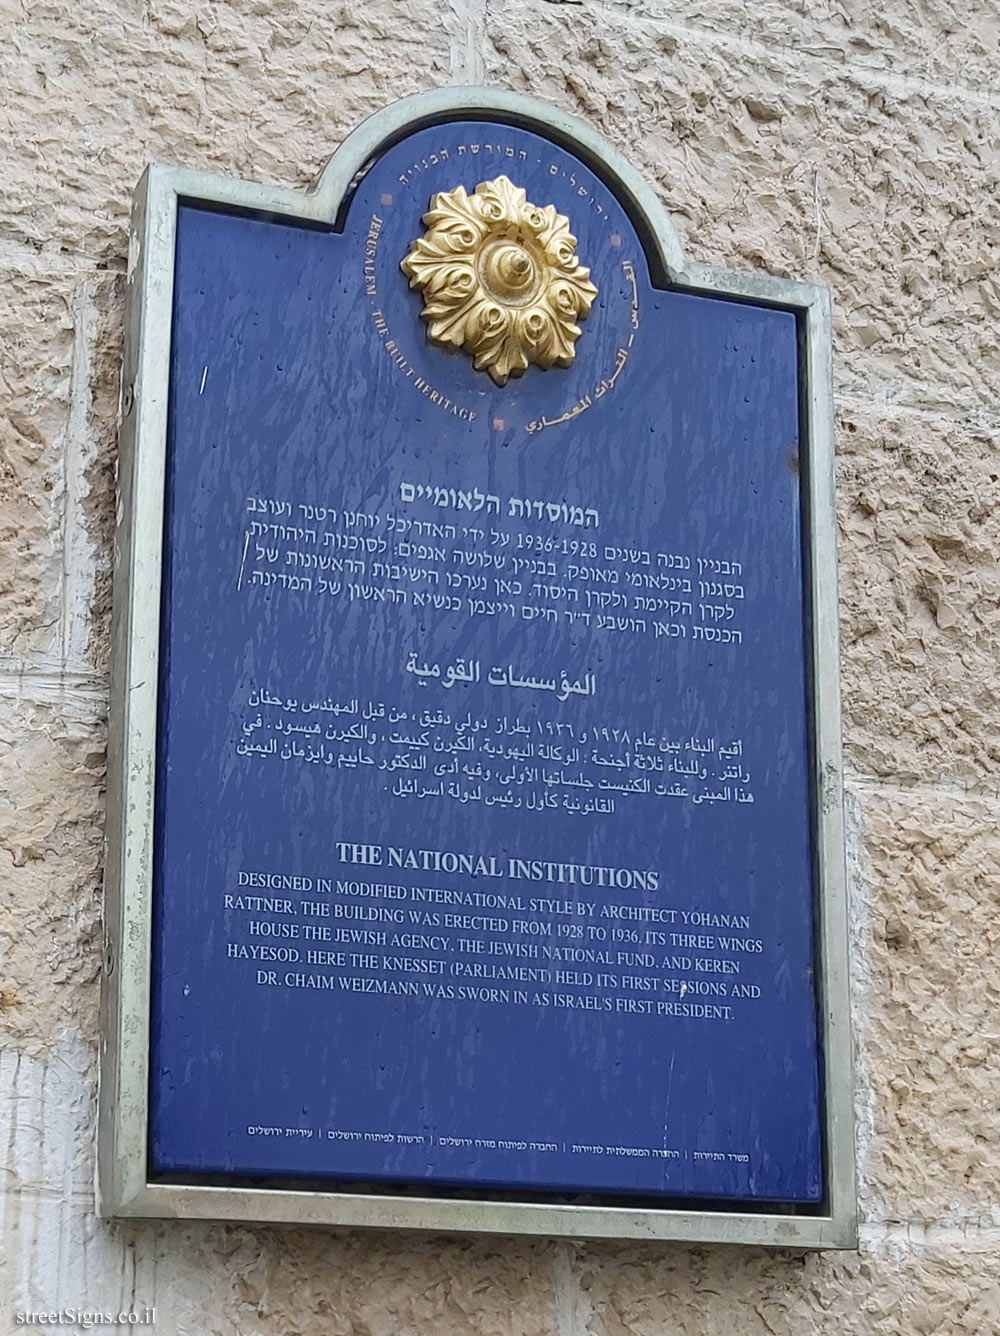 Jerusalem - The Built Heritage - The National Institutions